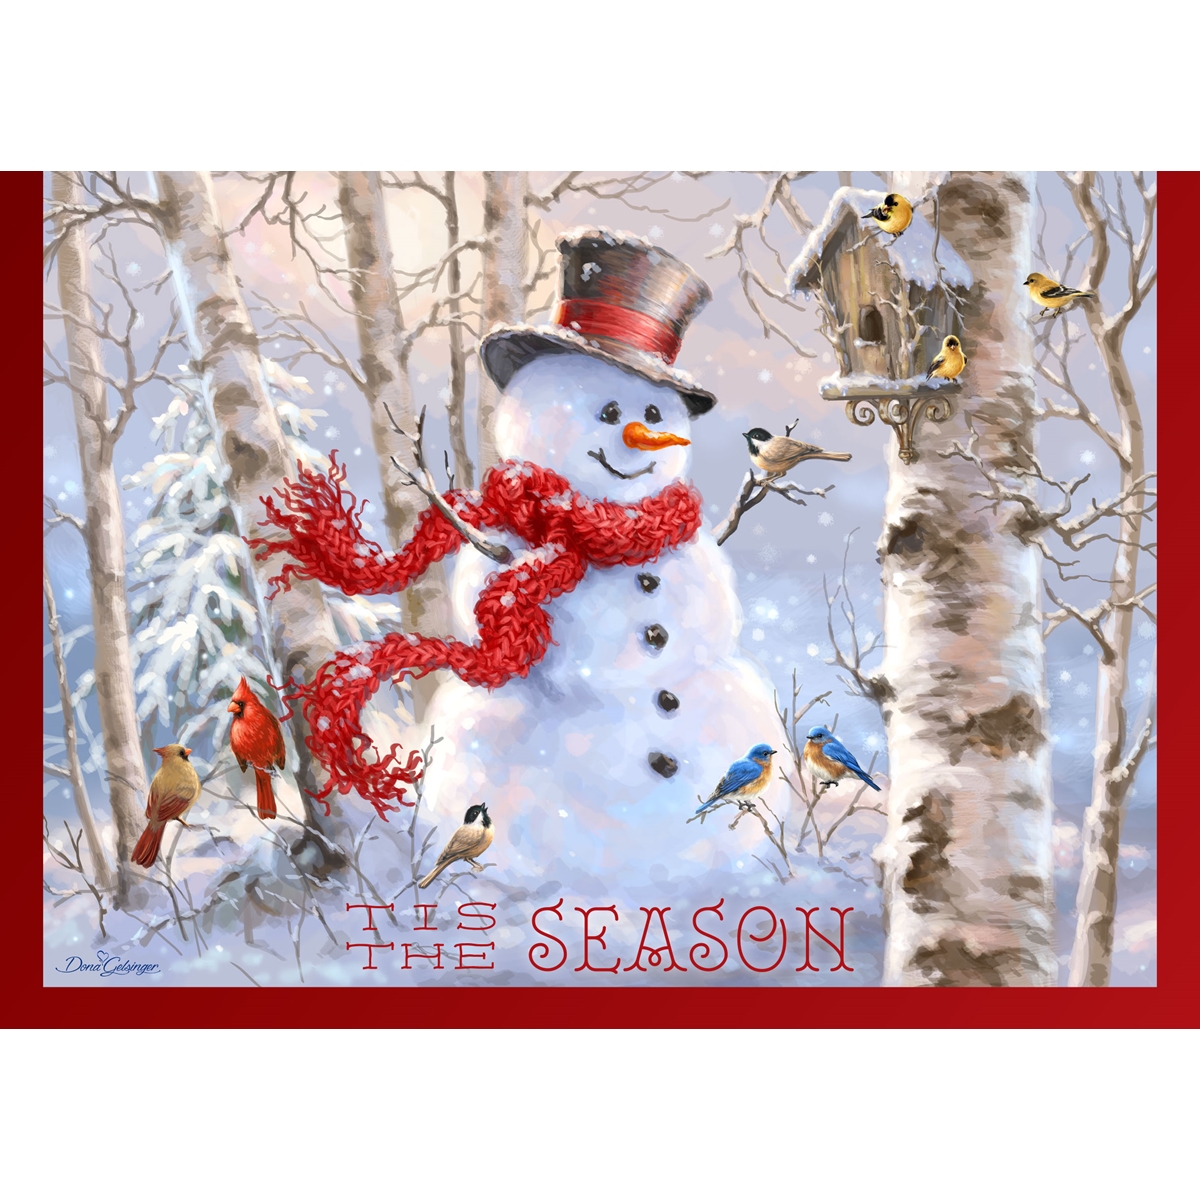 Snowman and Friends in the Forest Cards - Personalized ($9.00 Fee Included)